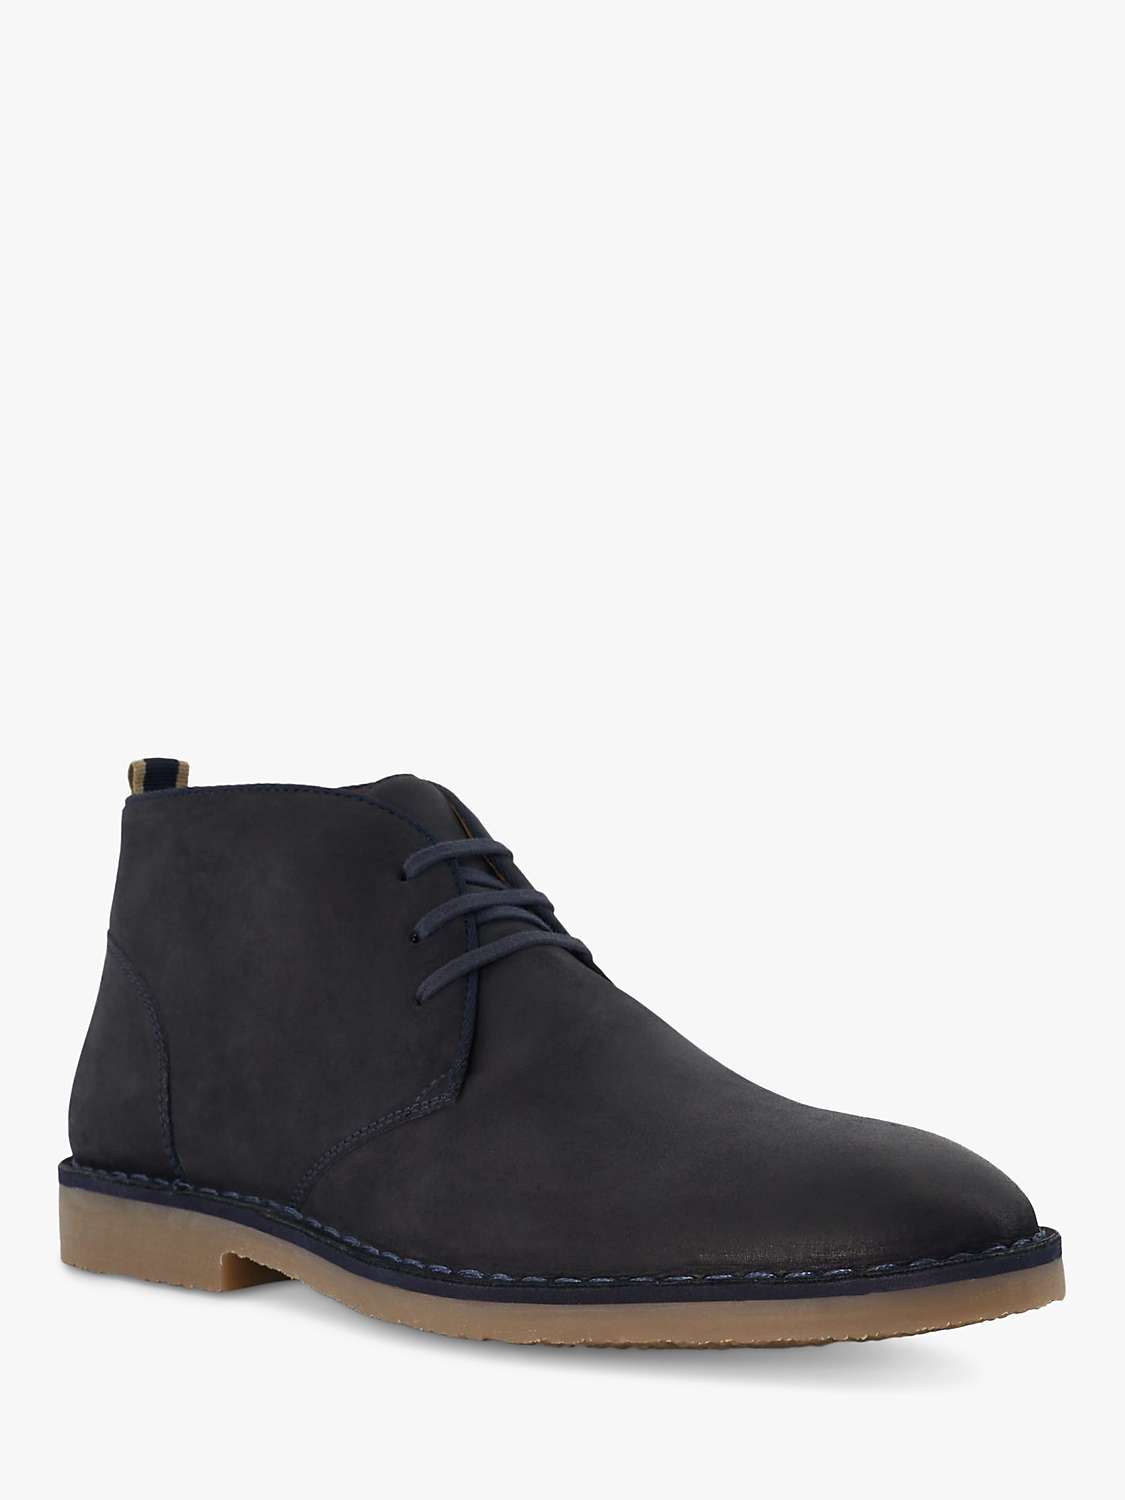 Buy Dune Cashed Lace Up Chukka Boots, Navy Online at johnlewis.com